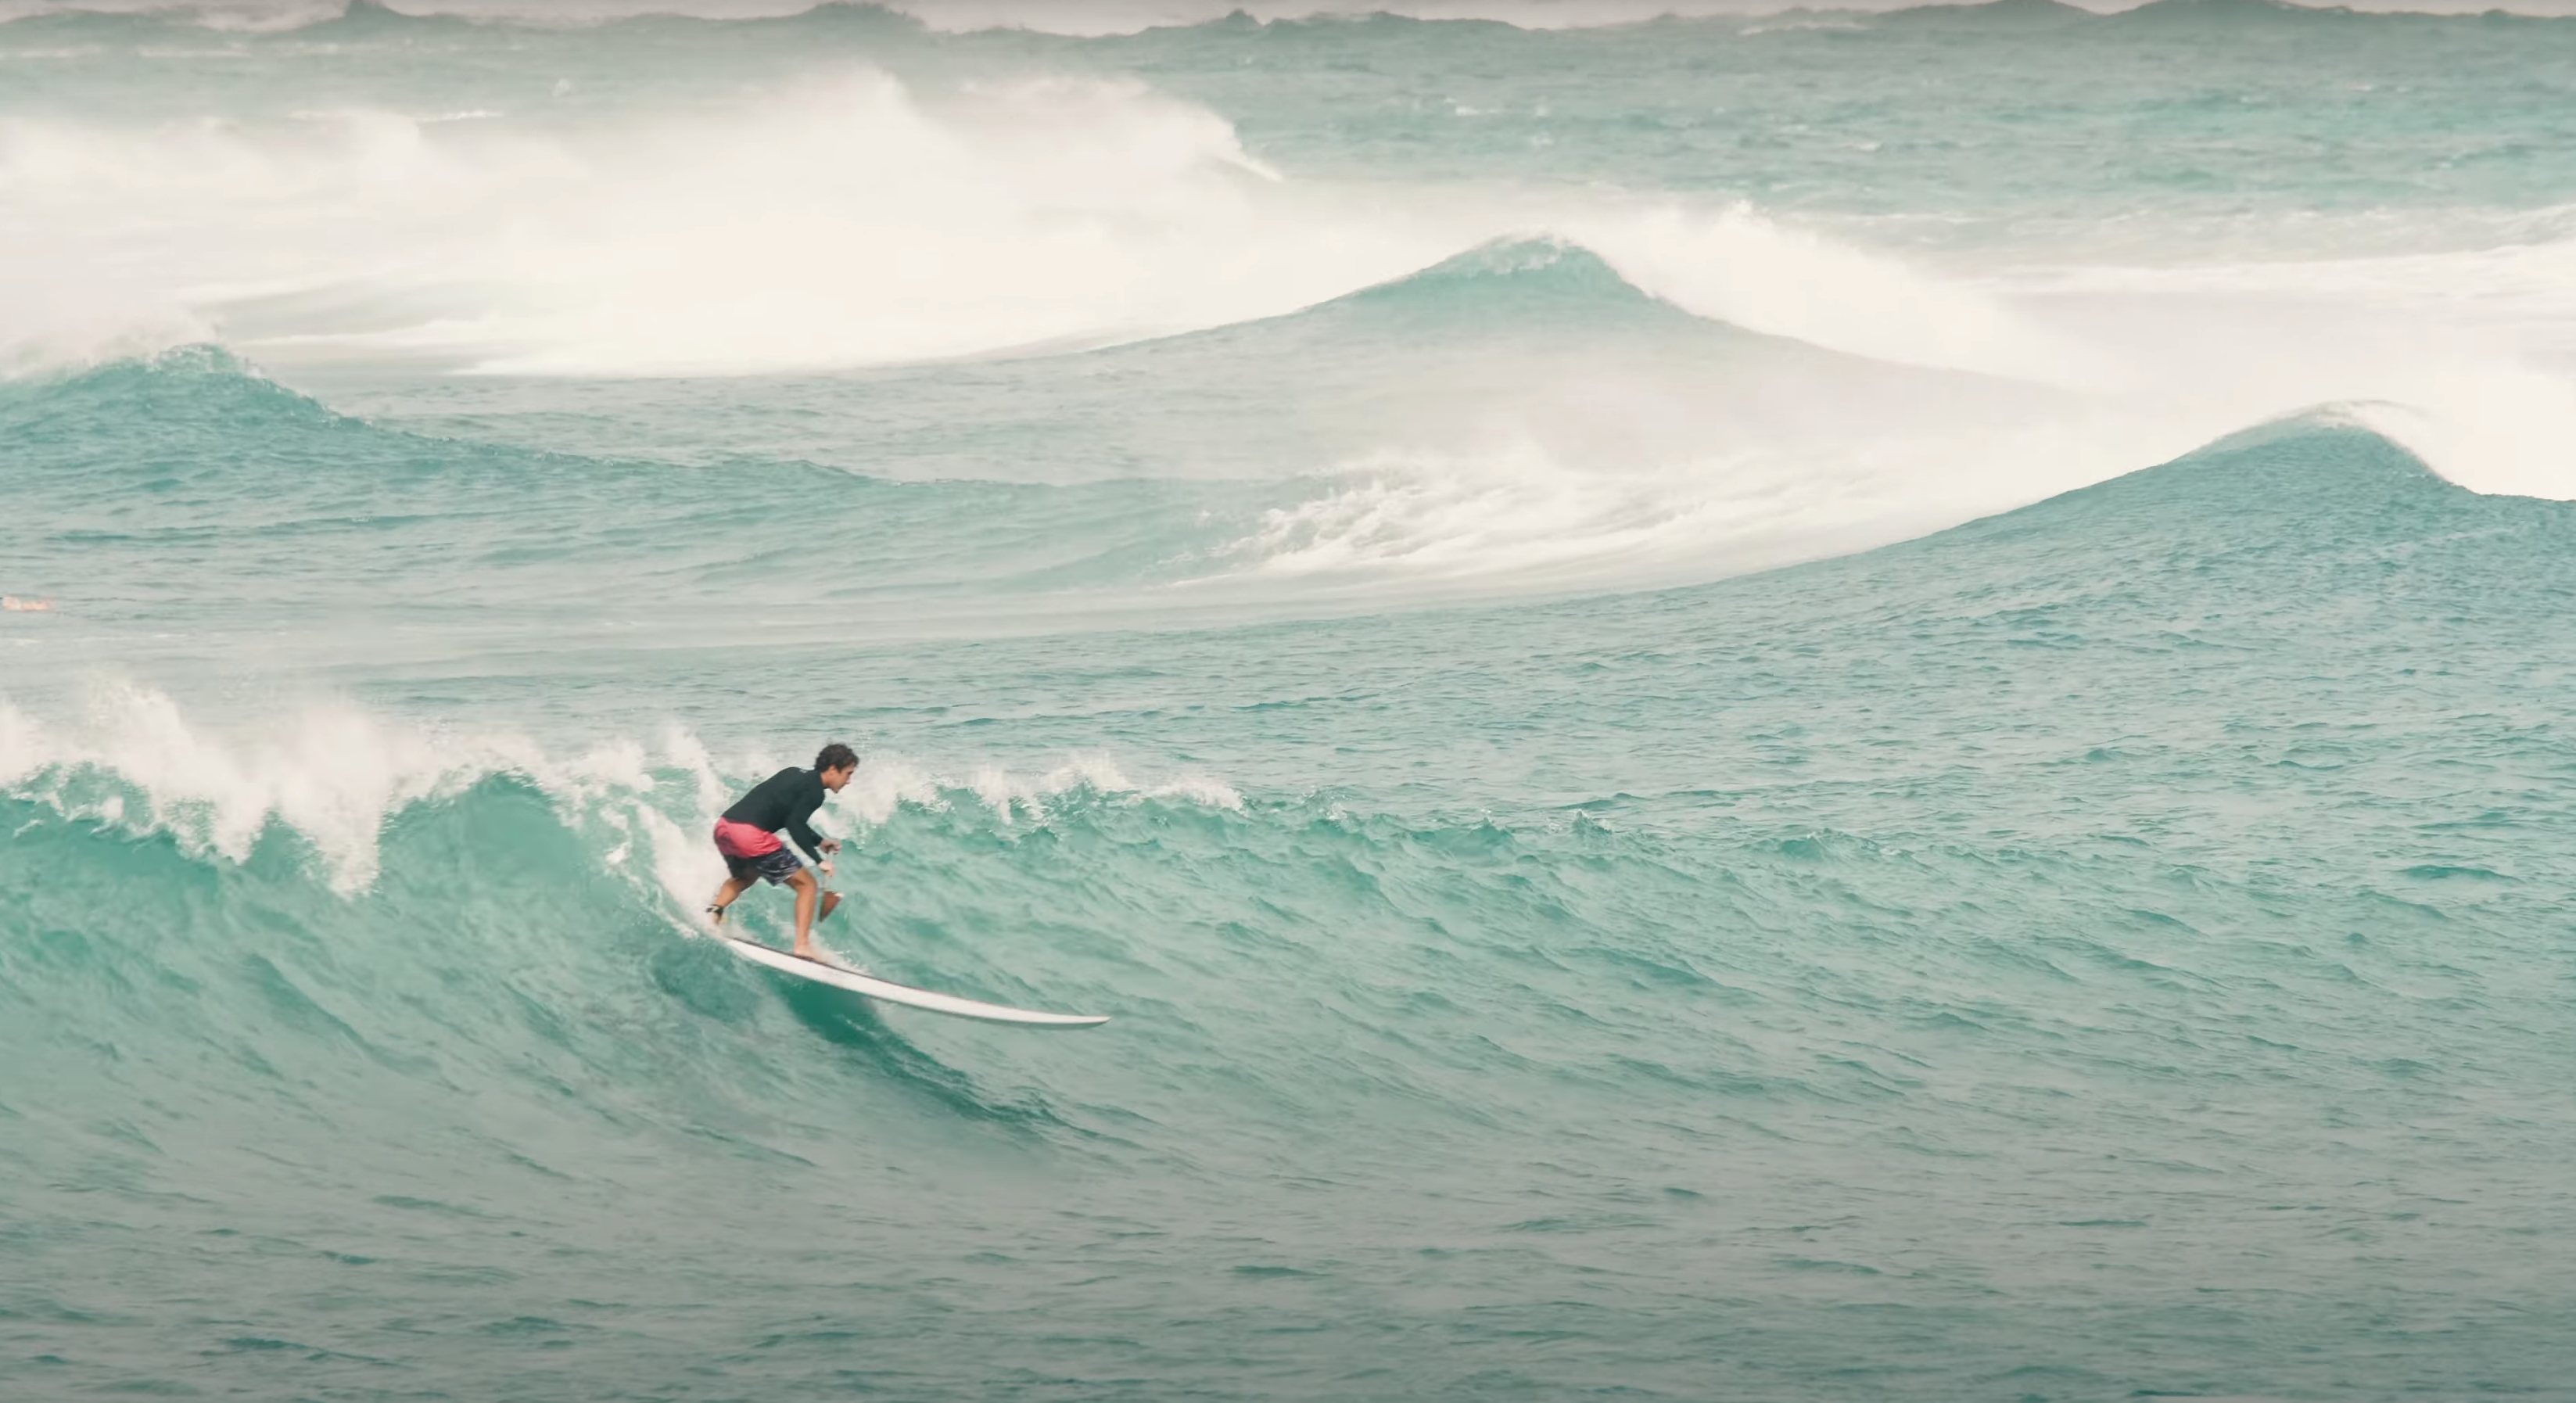 Watch Hawaiian Surfer Koa Rothman going Sup Surfing at Rocky point as he injured his neck surfing...